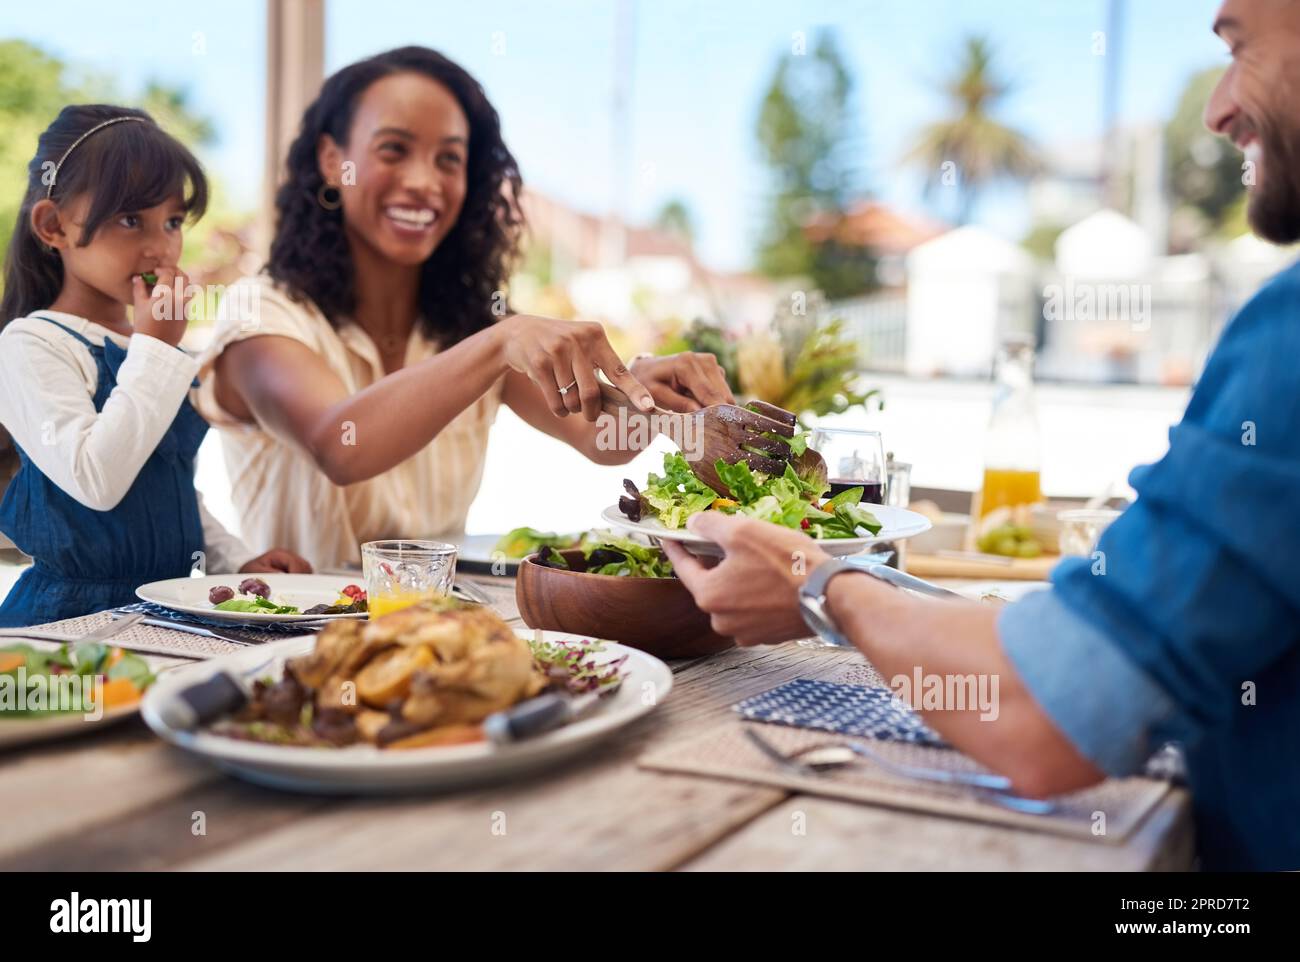 She always makes sure we maintain a healthy diet. a beautiful young woman dishing up salad on her husbands plate while enjoying a meal with family outdoors. Stock Photo